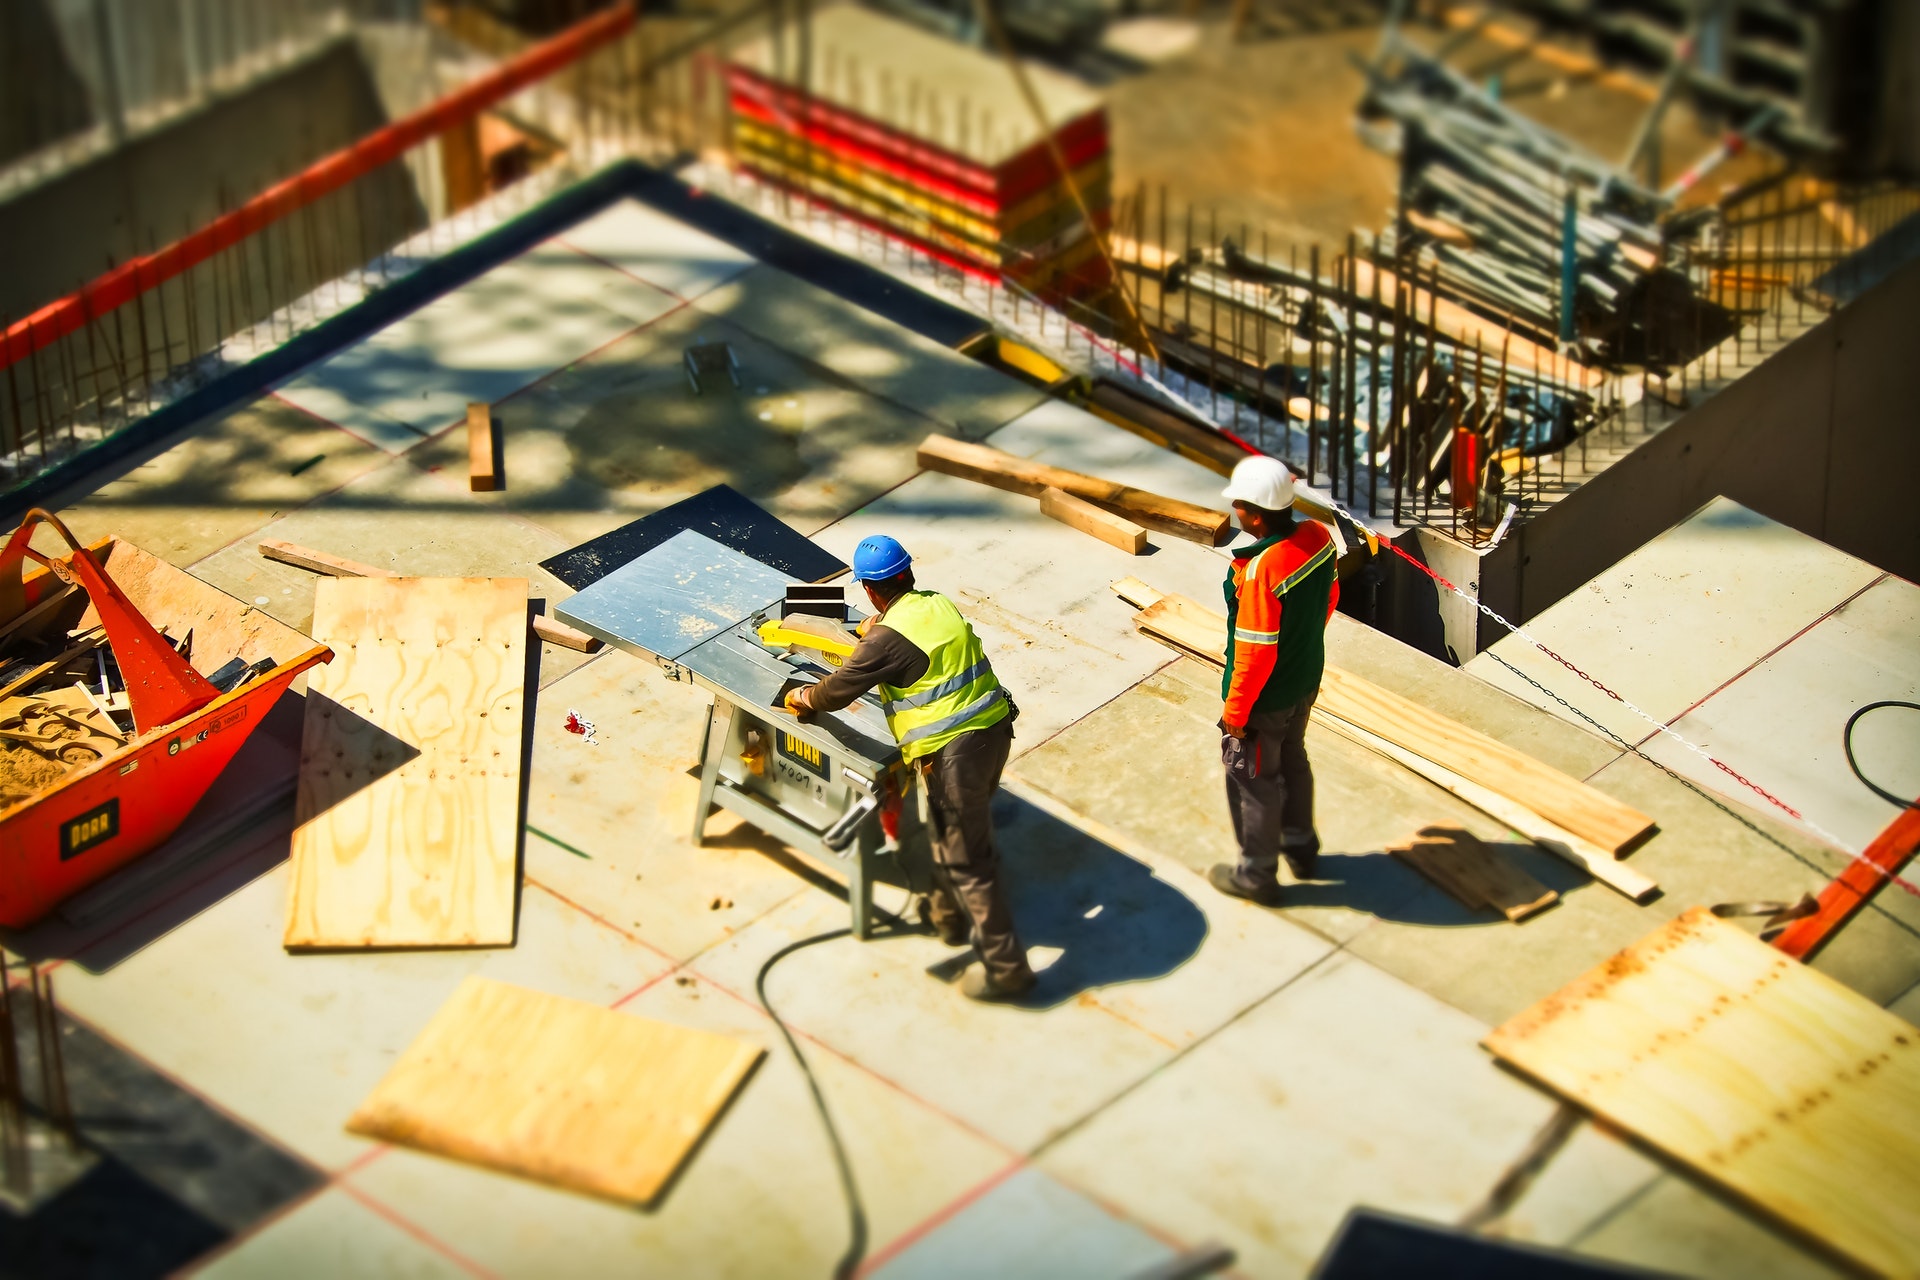 Building Construction Safety – Fireproofing, Maintaining and Inspecting the Structures